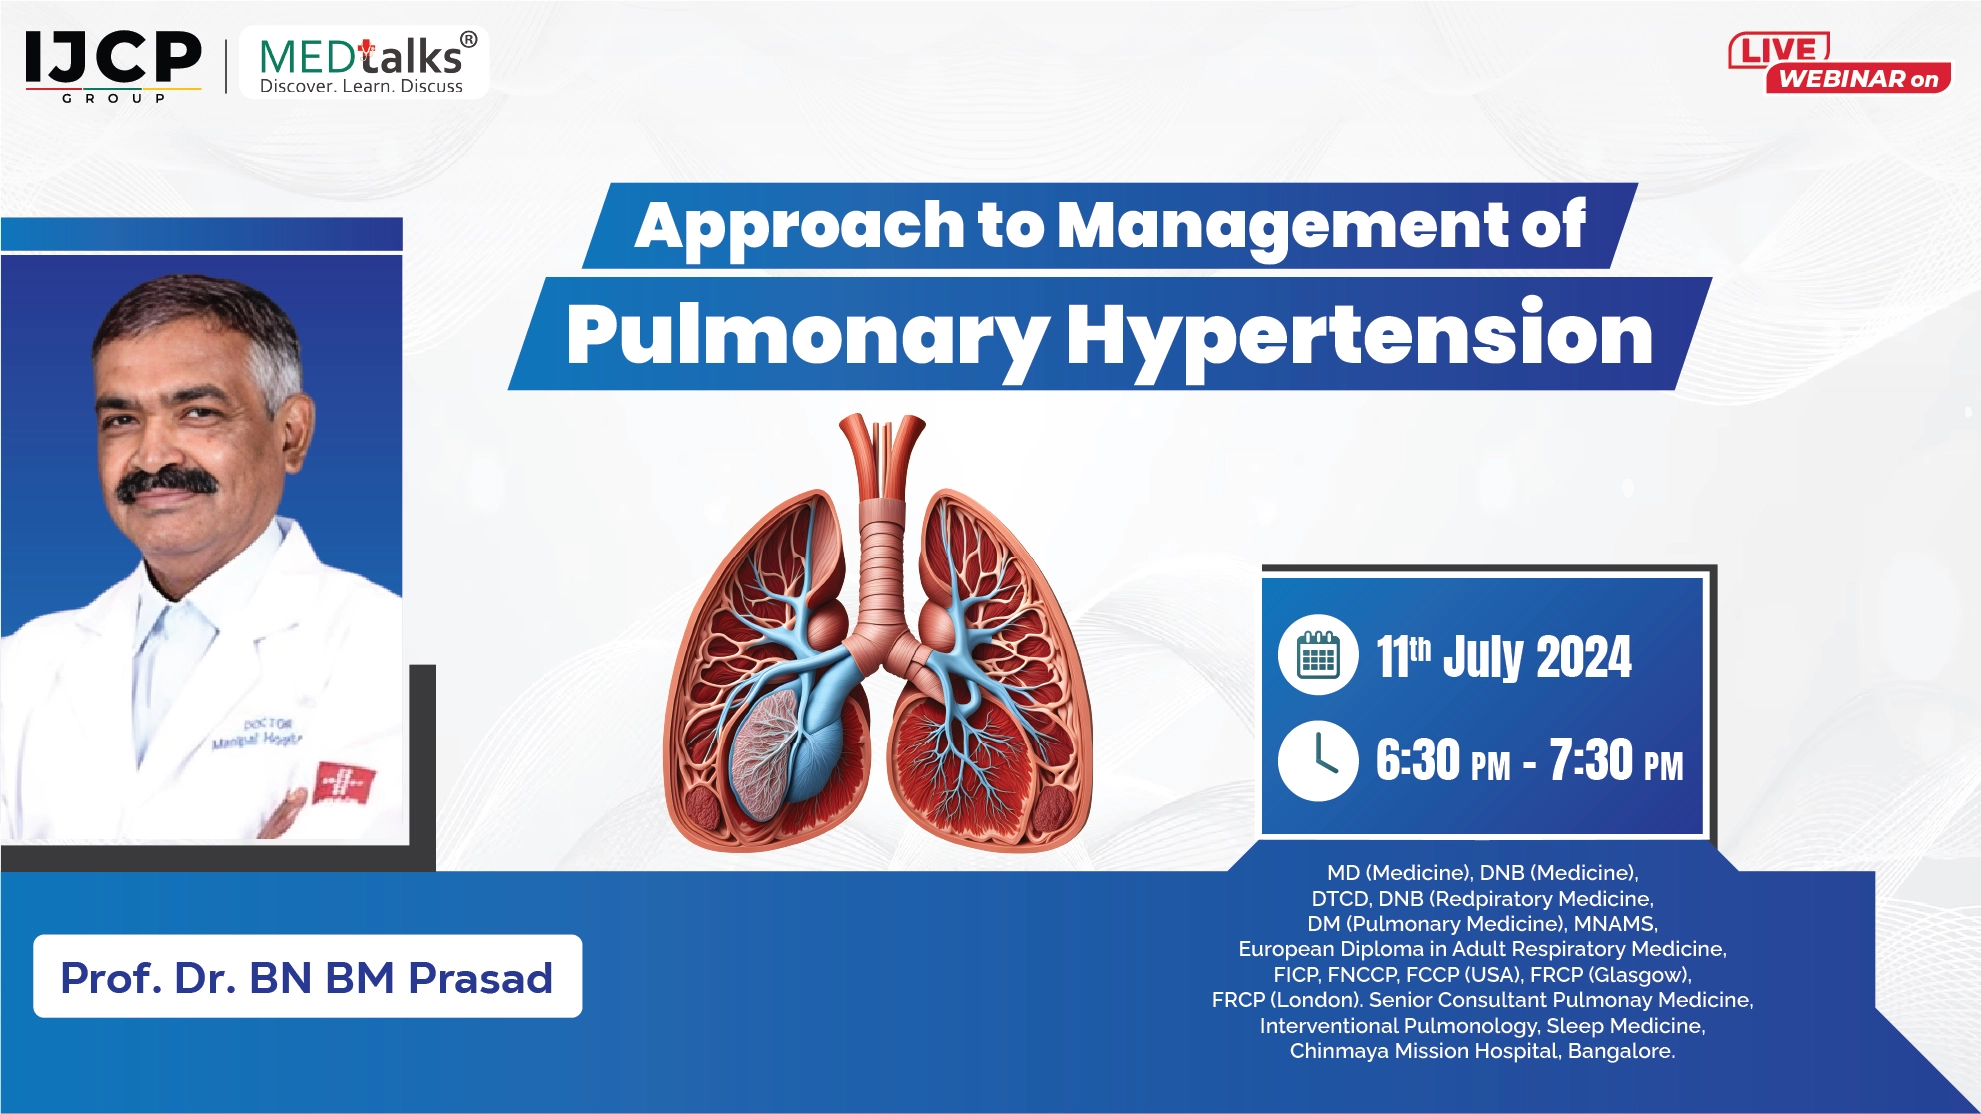 Approach to Management of Pulmonary Hypertension